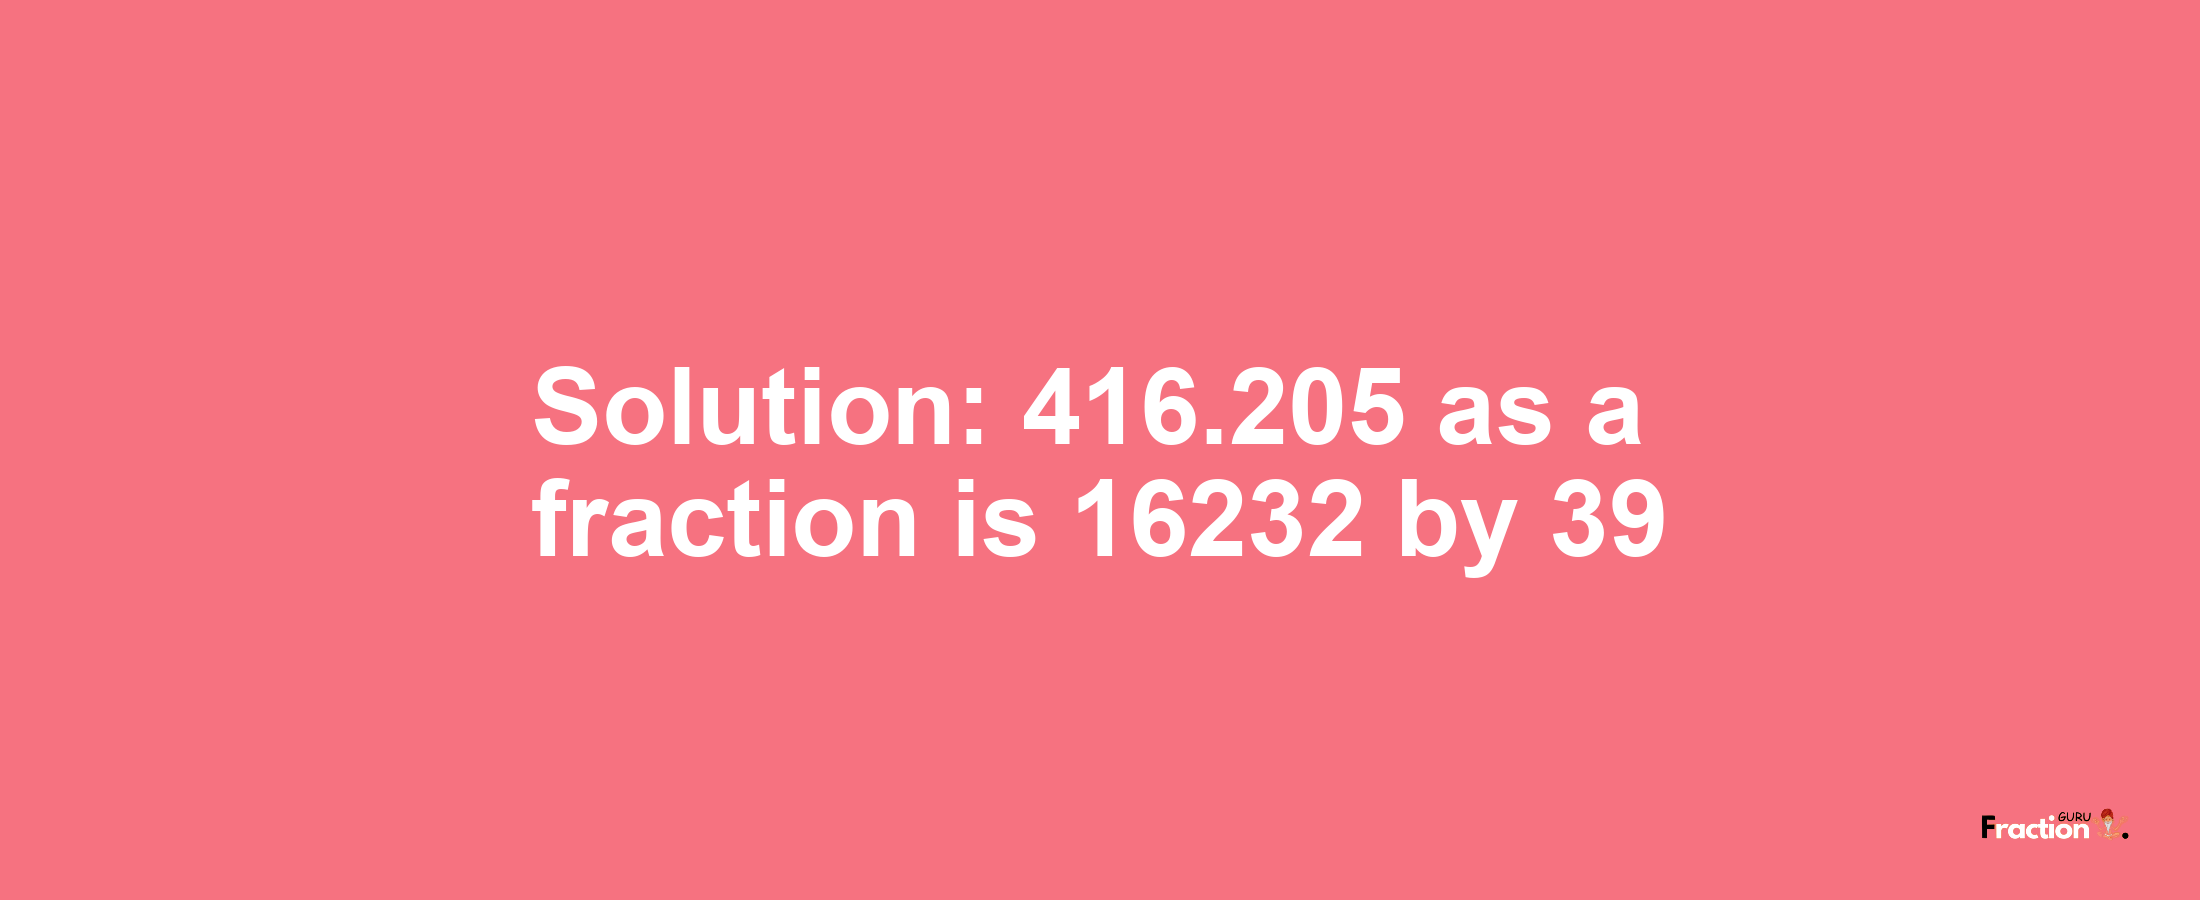 Solution:416.205 as a fraction is 16232/39